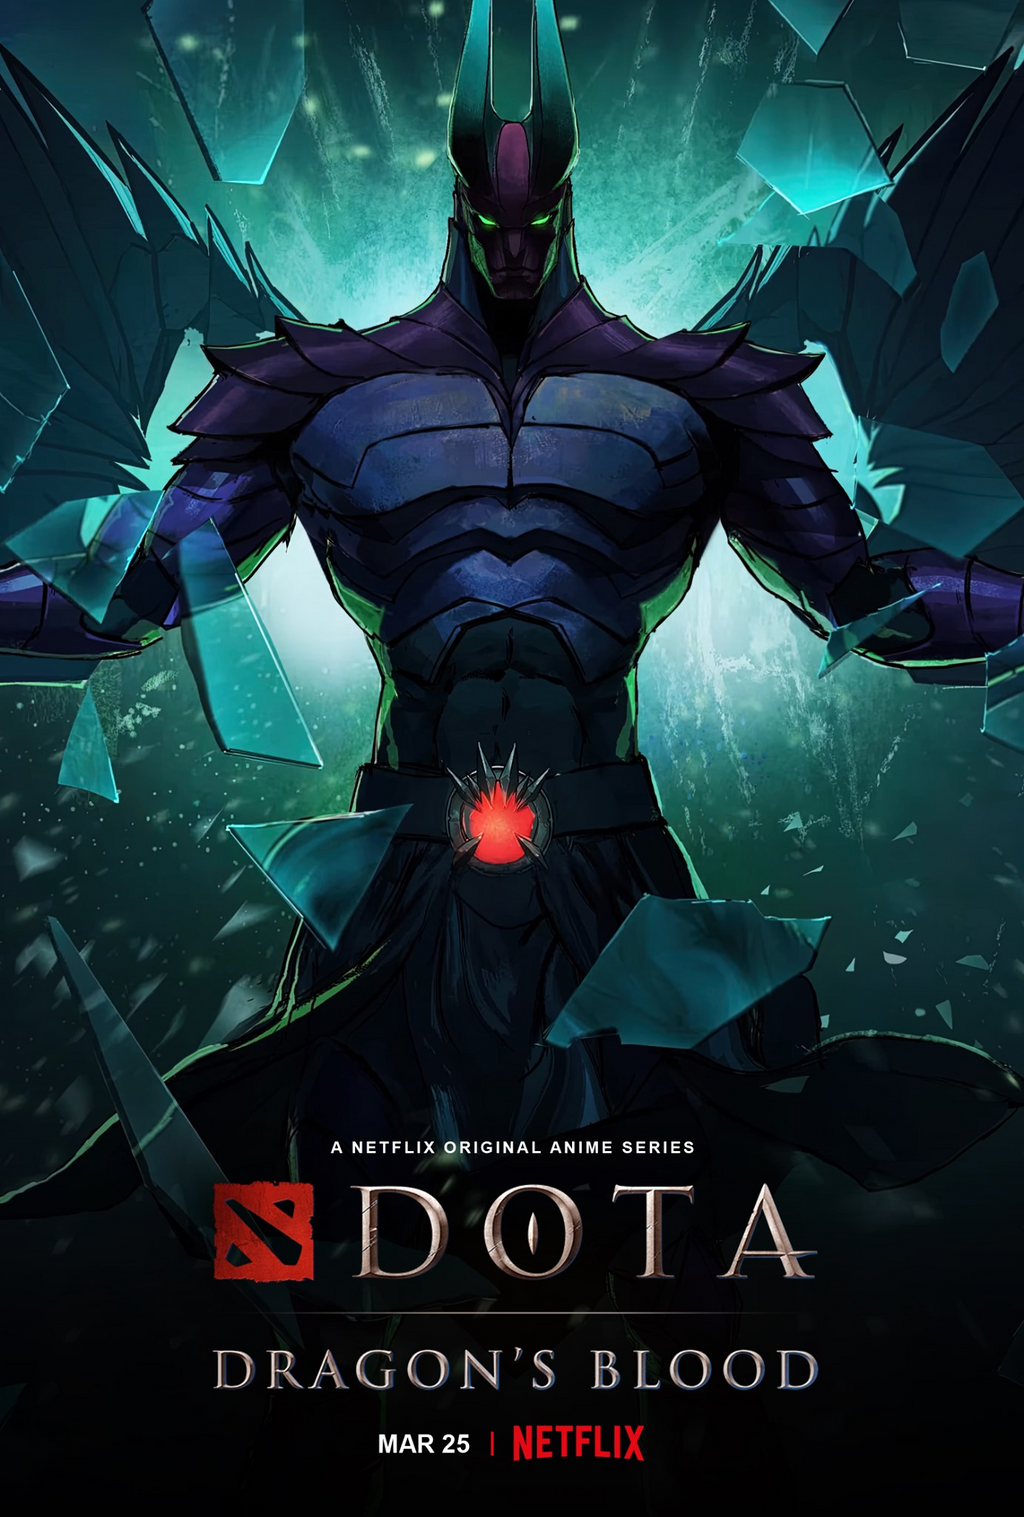 Dota 2's Free to Play documentary is coming to Netflix